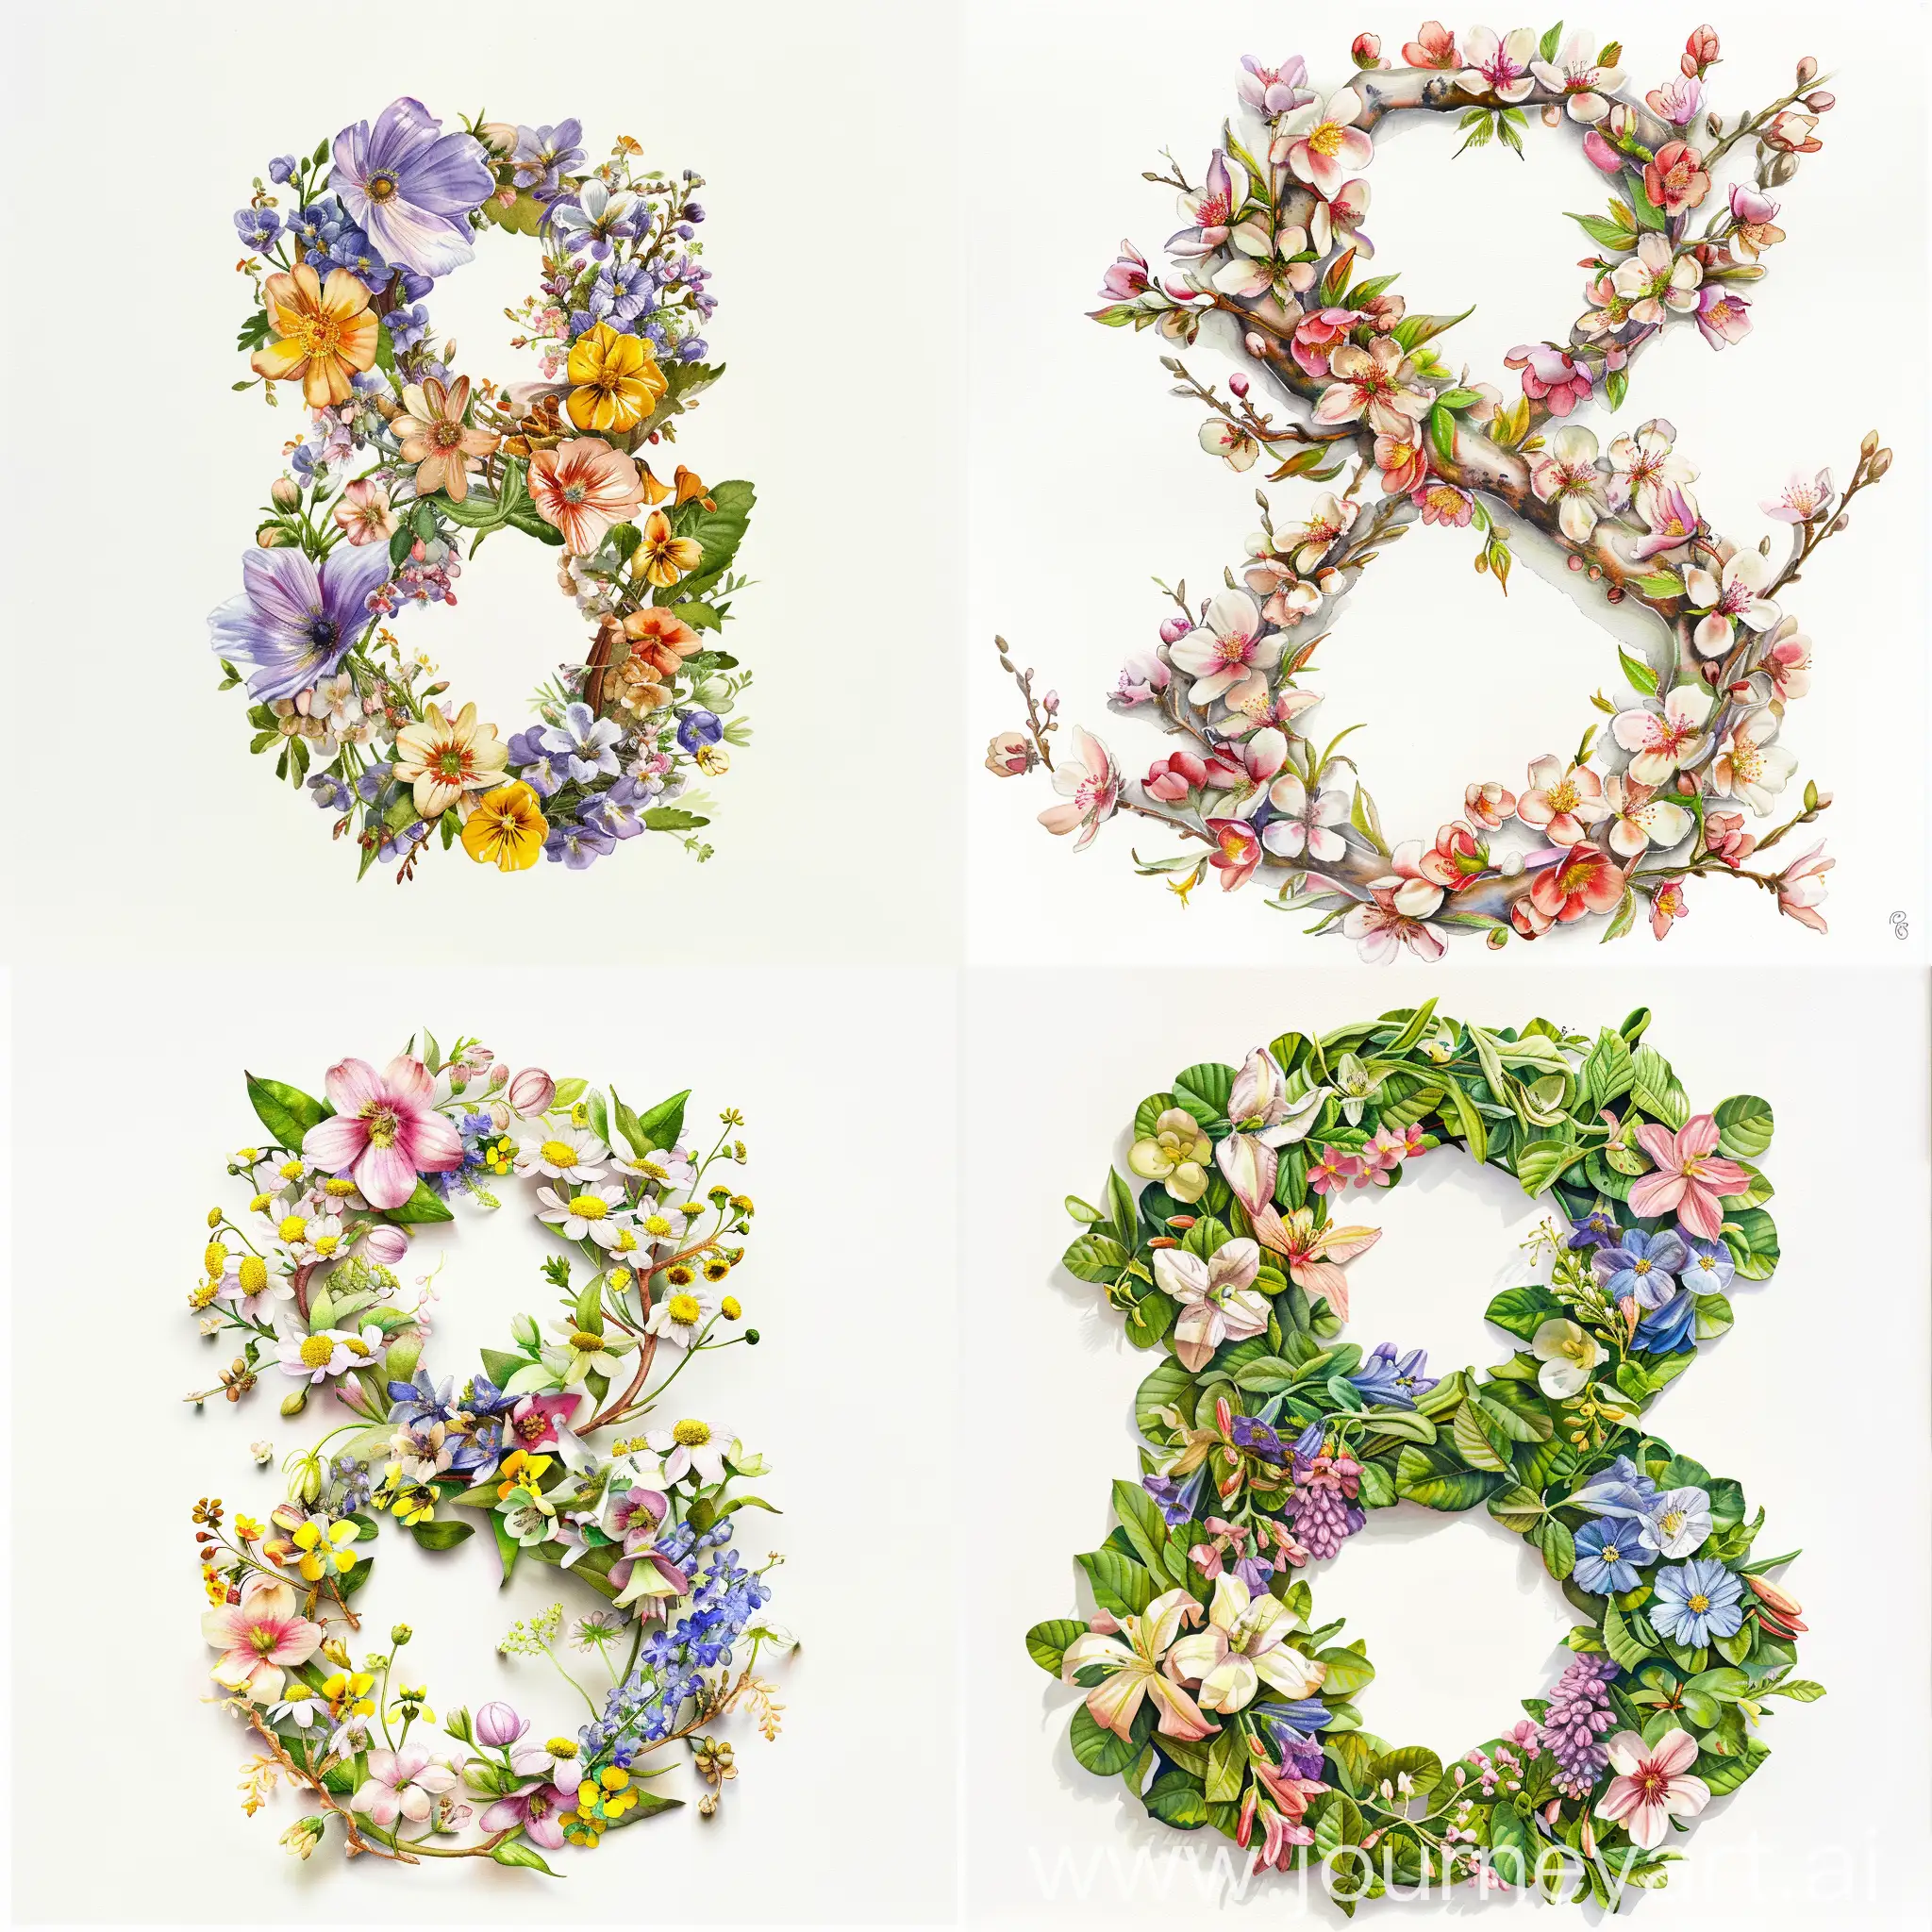 text "8" as spring flowers, white background, watercolor painting 